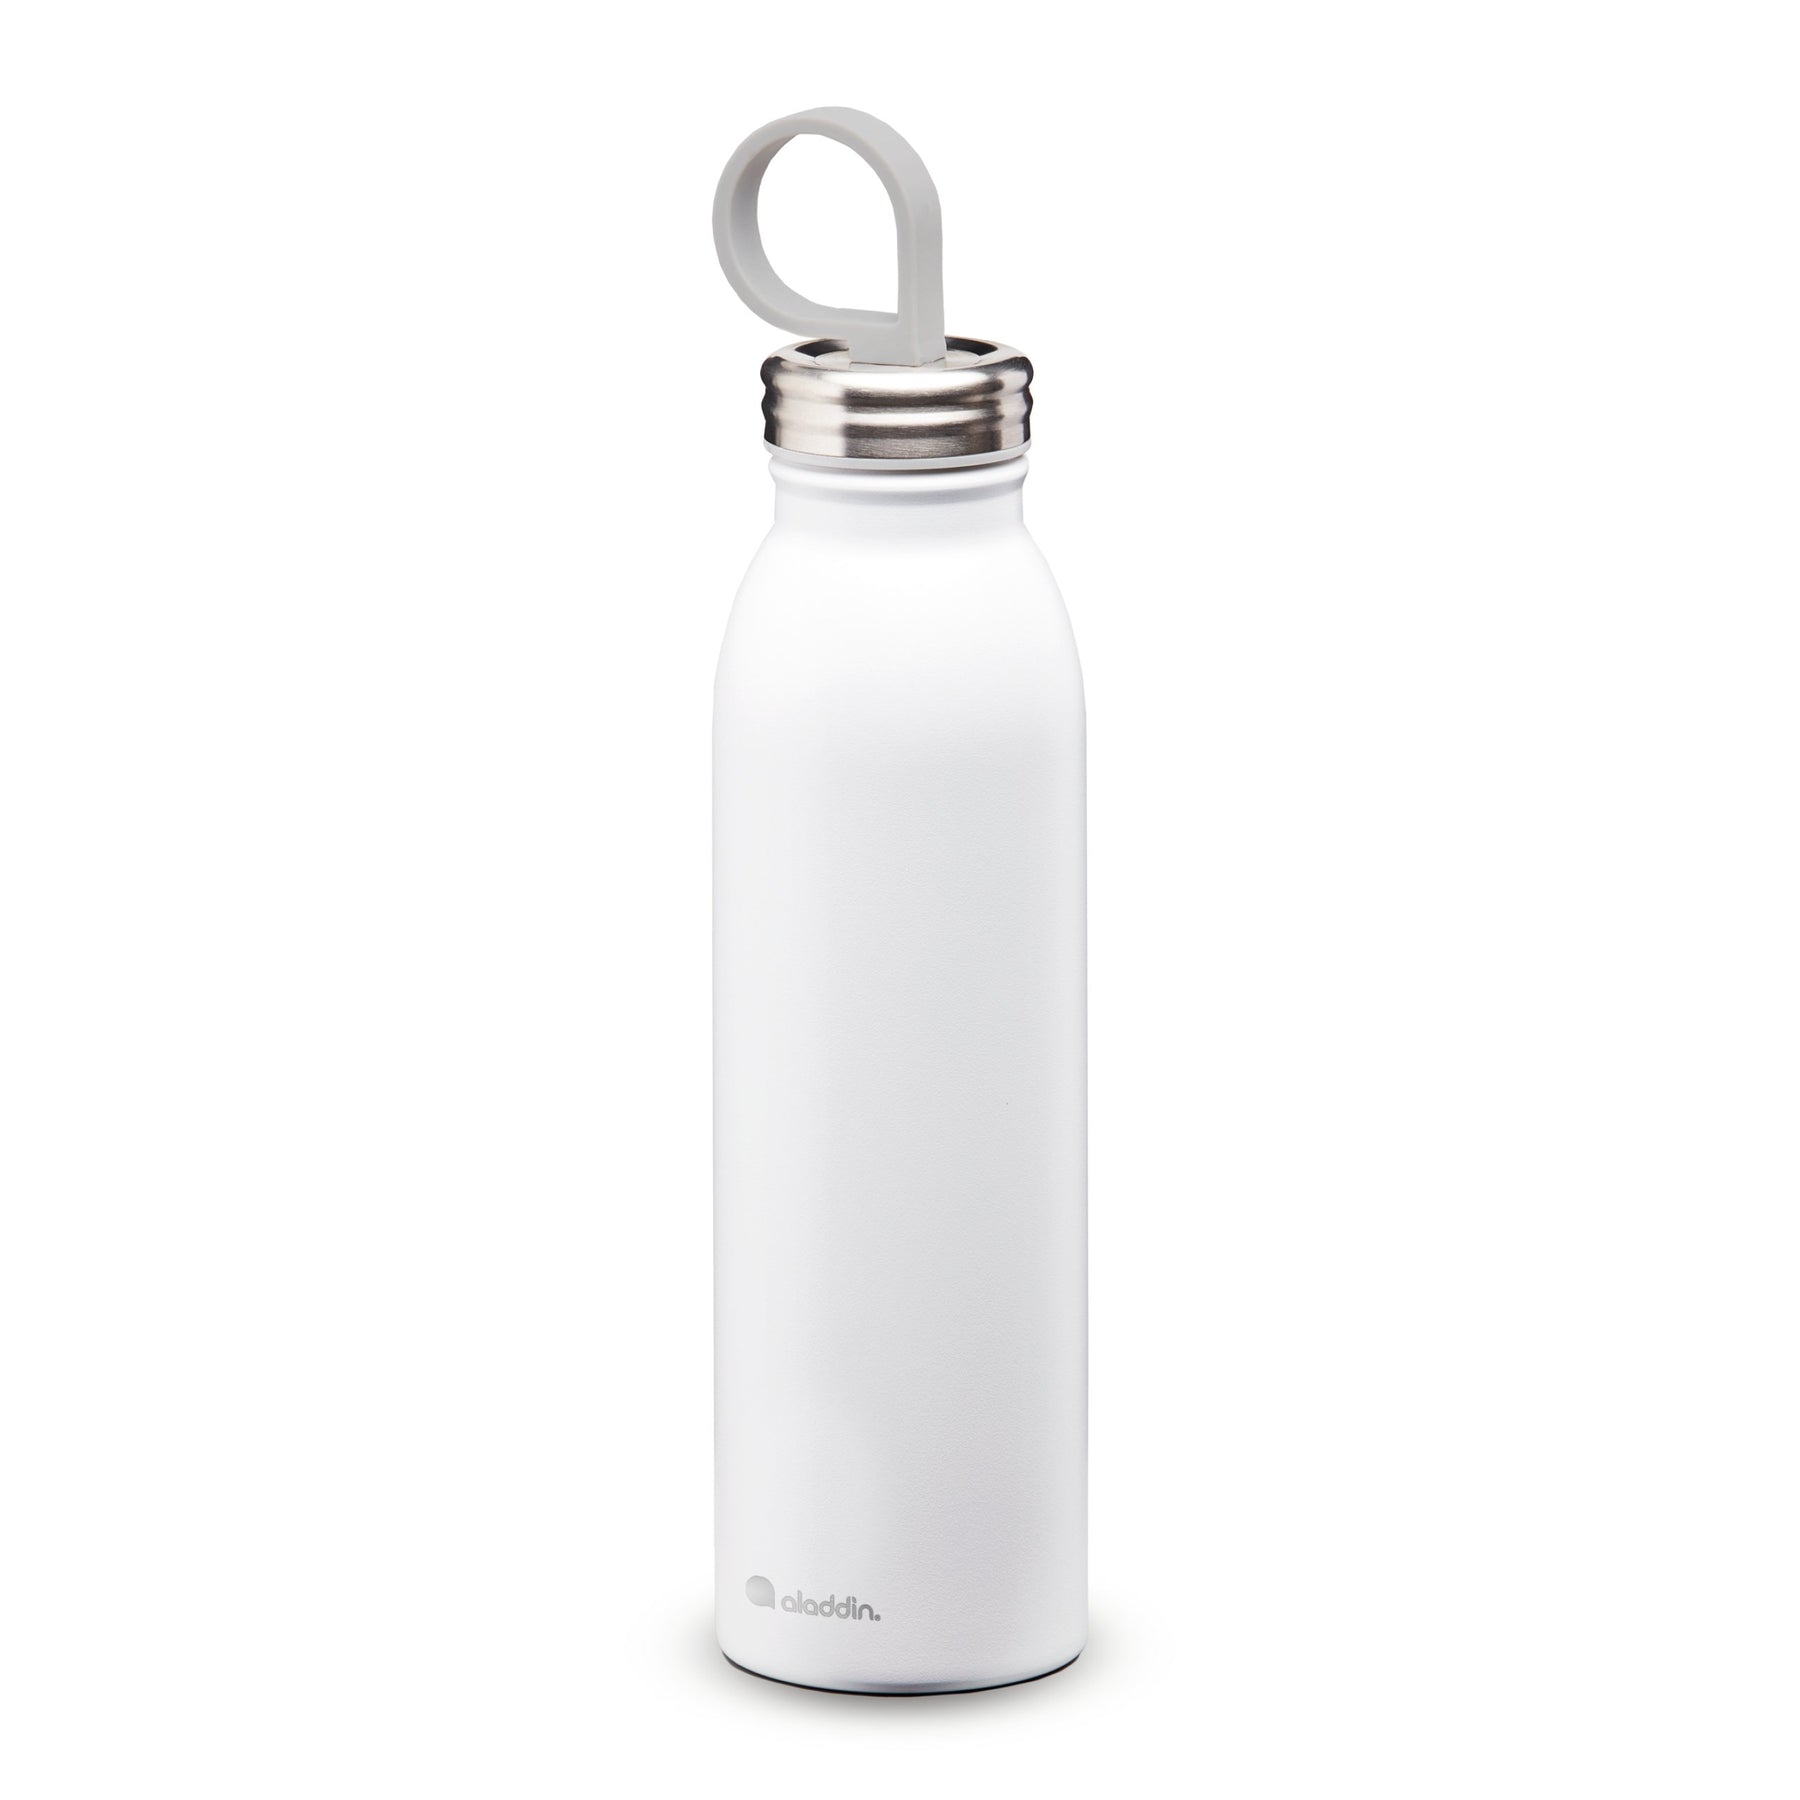 Aladdin-Chilled-Thermavac_-Colour-Stainless-Steel-Water-Bottle-0.55L-Snowflake-White-10-09425-006-Hero_1800x1800